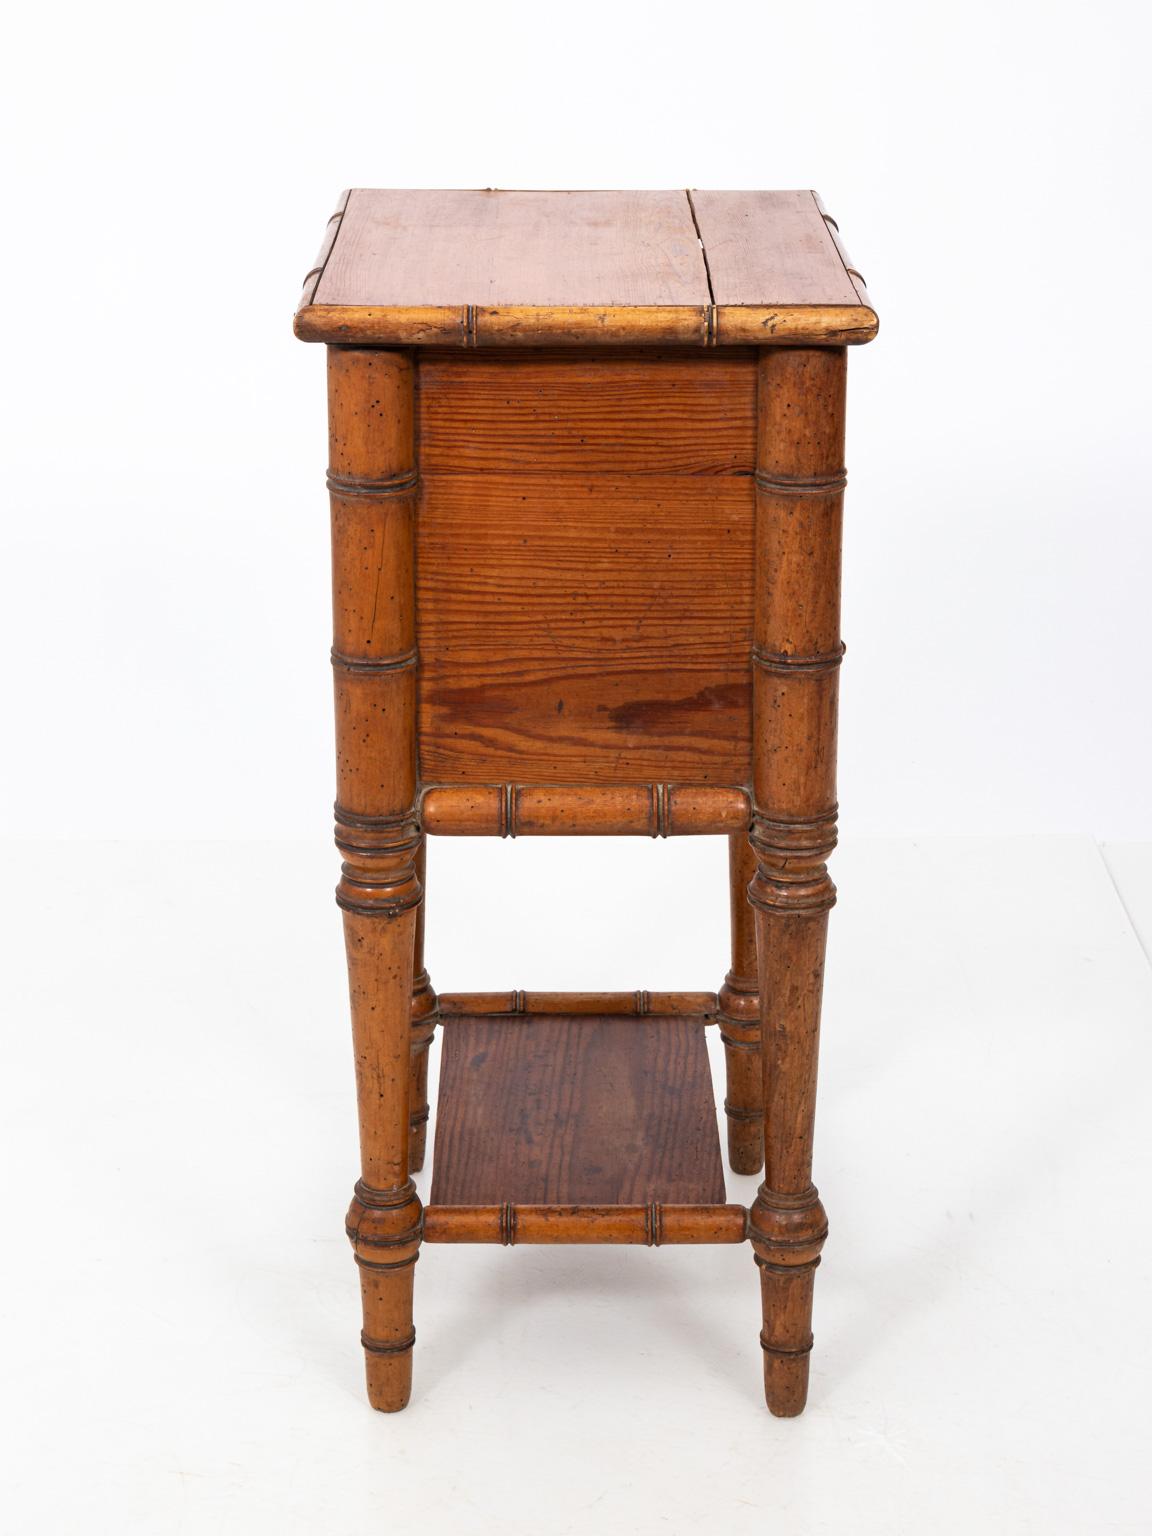 French faux bamboo night stand or side table made of long-leaf pinewood with one drawer, a lower cabinet, and bottom shelf, circa 19th century. The piece also features ring turned legs. Please note of wear consistent with age including a crack on